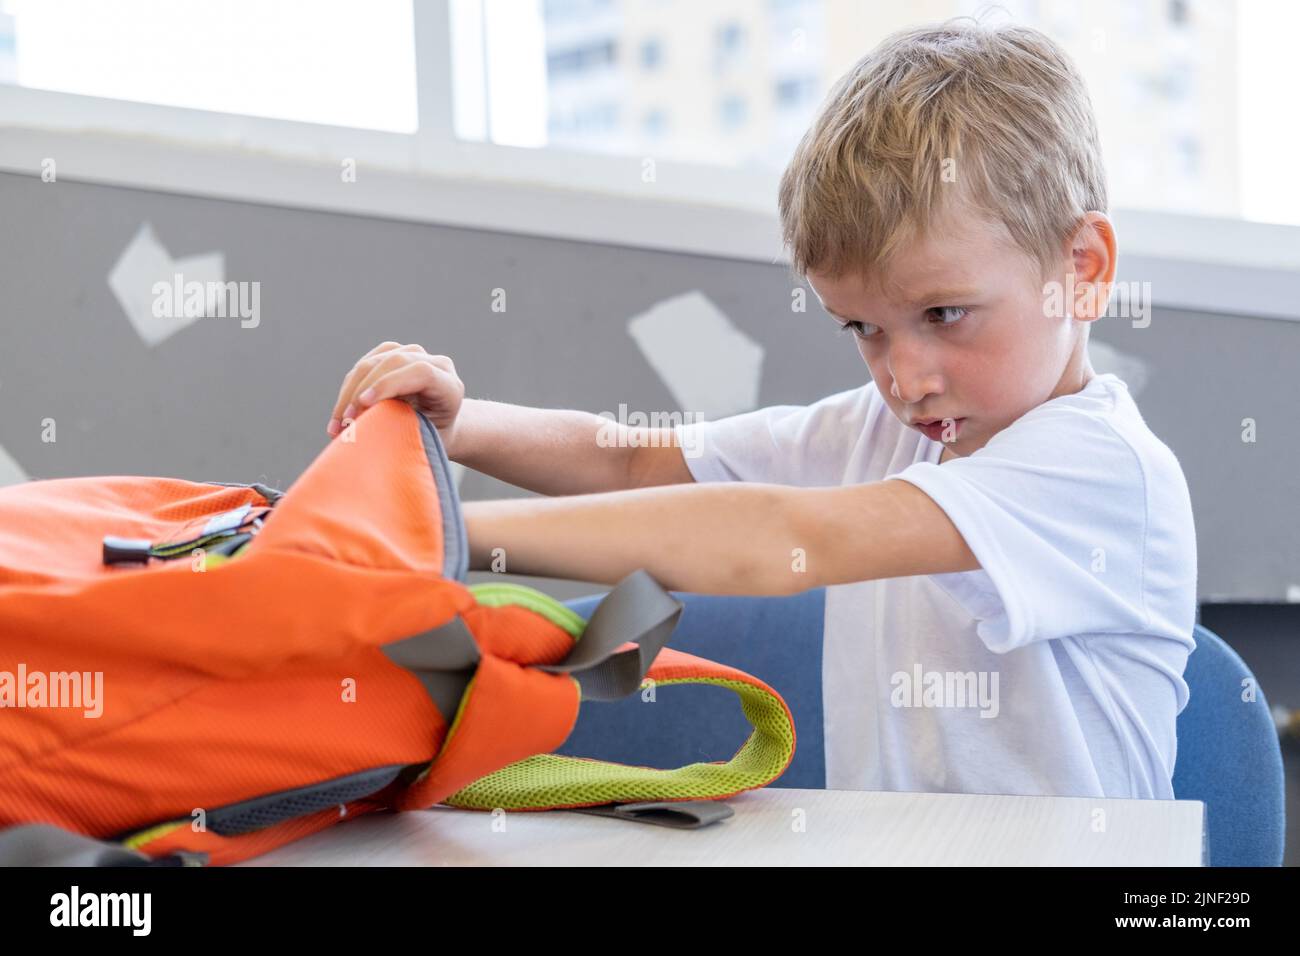 The student takes out stationery, books from a backpack. A little boy looks into a school bag. Back to school. School and preschool education. Stock Photo